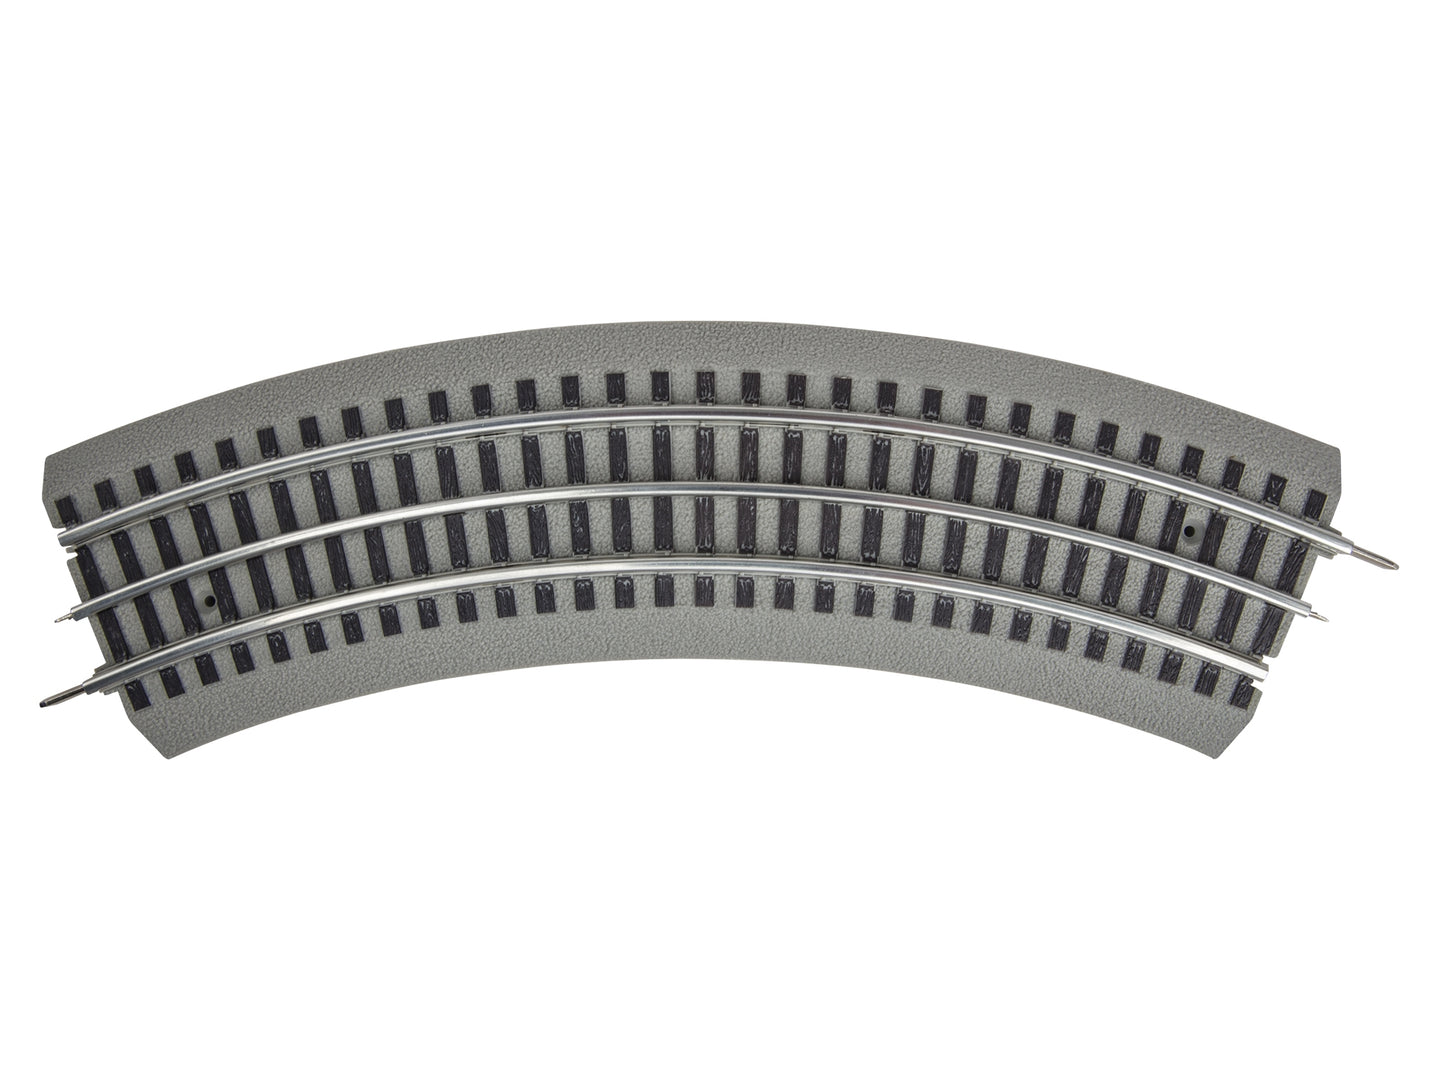 Lionel Fastrack 031 Curved Track